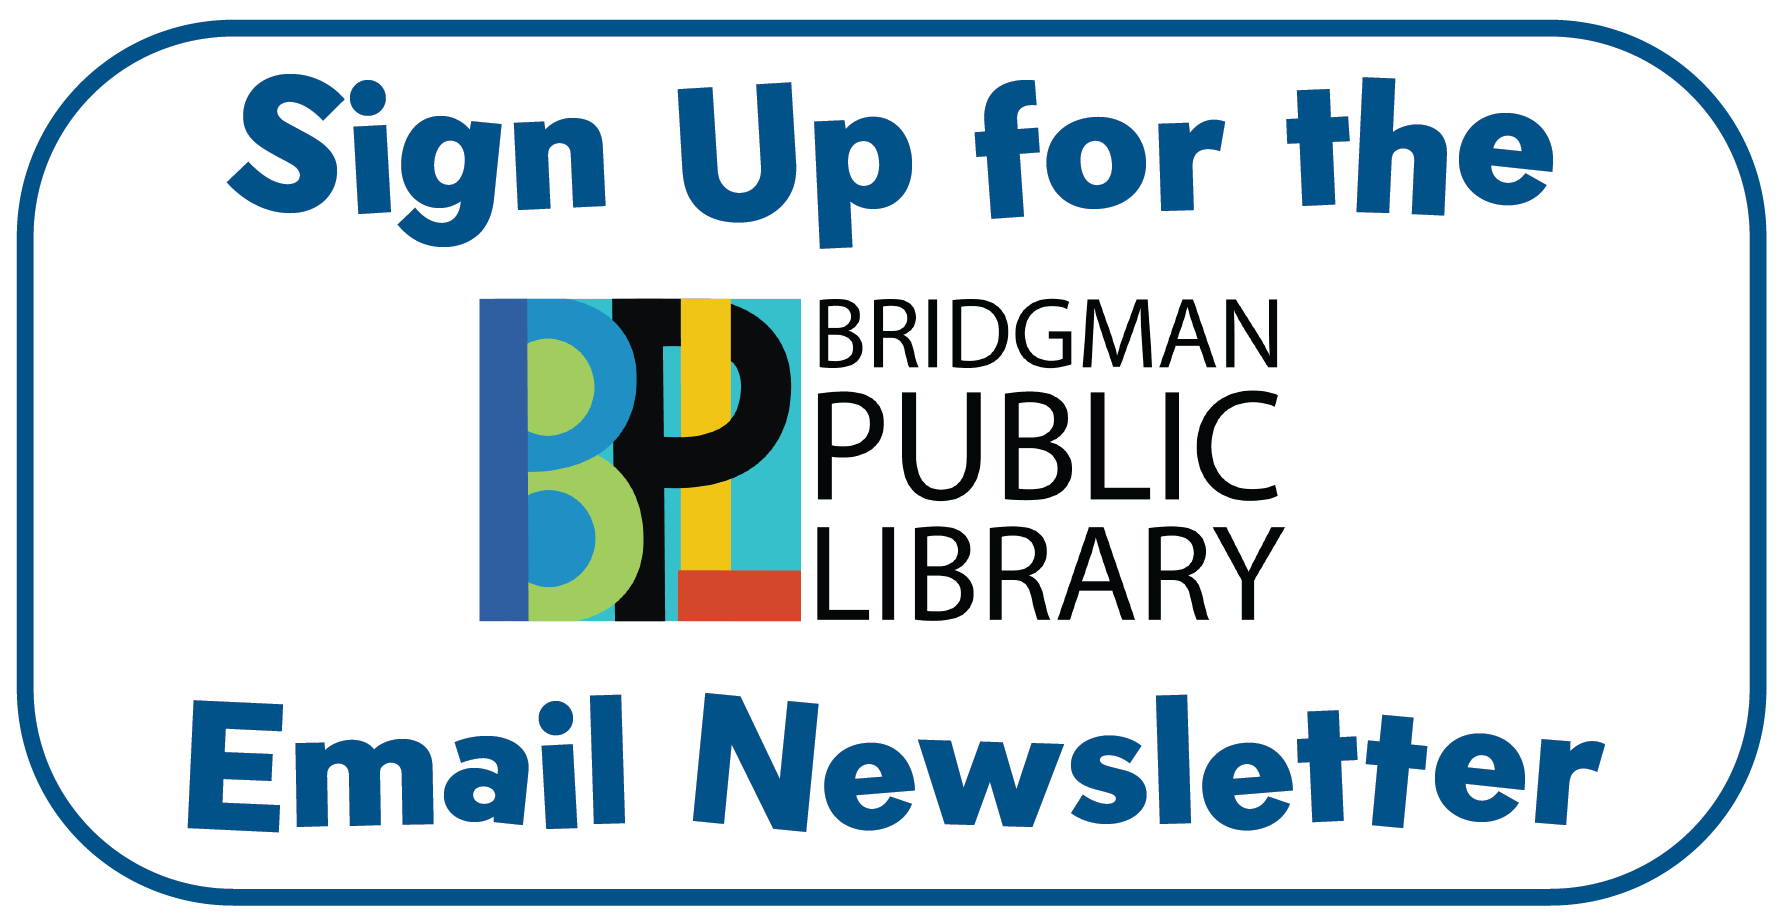 A link to sign up for the Bridgman Library email newsletter